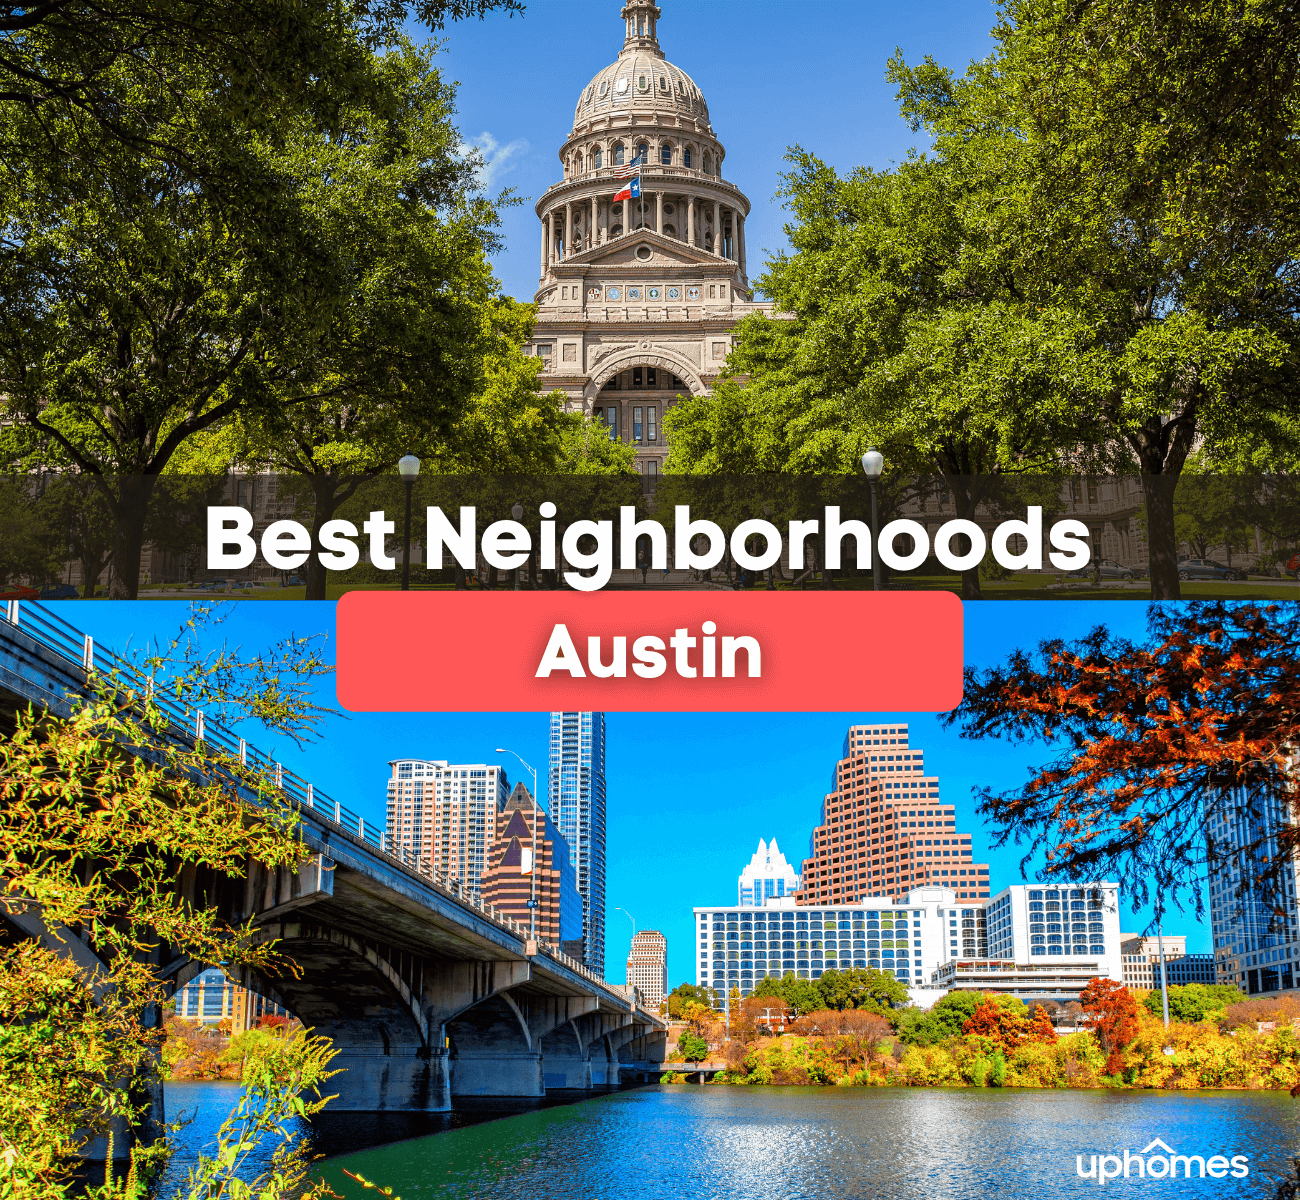 Best neighborhoods in Austin, TX - What are the best places to live in Austin?